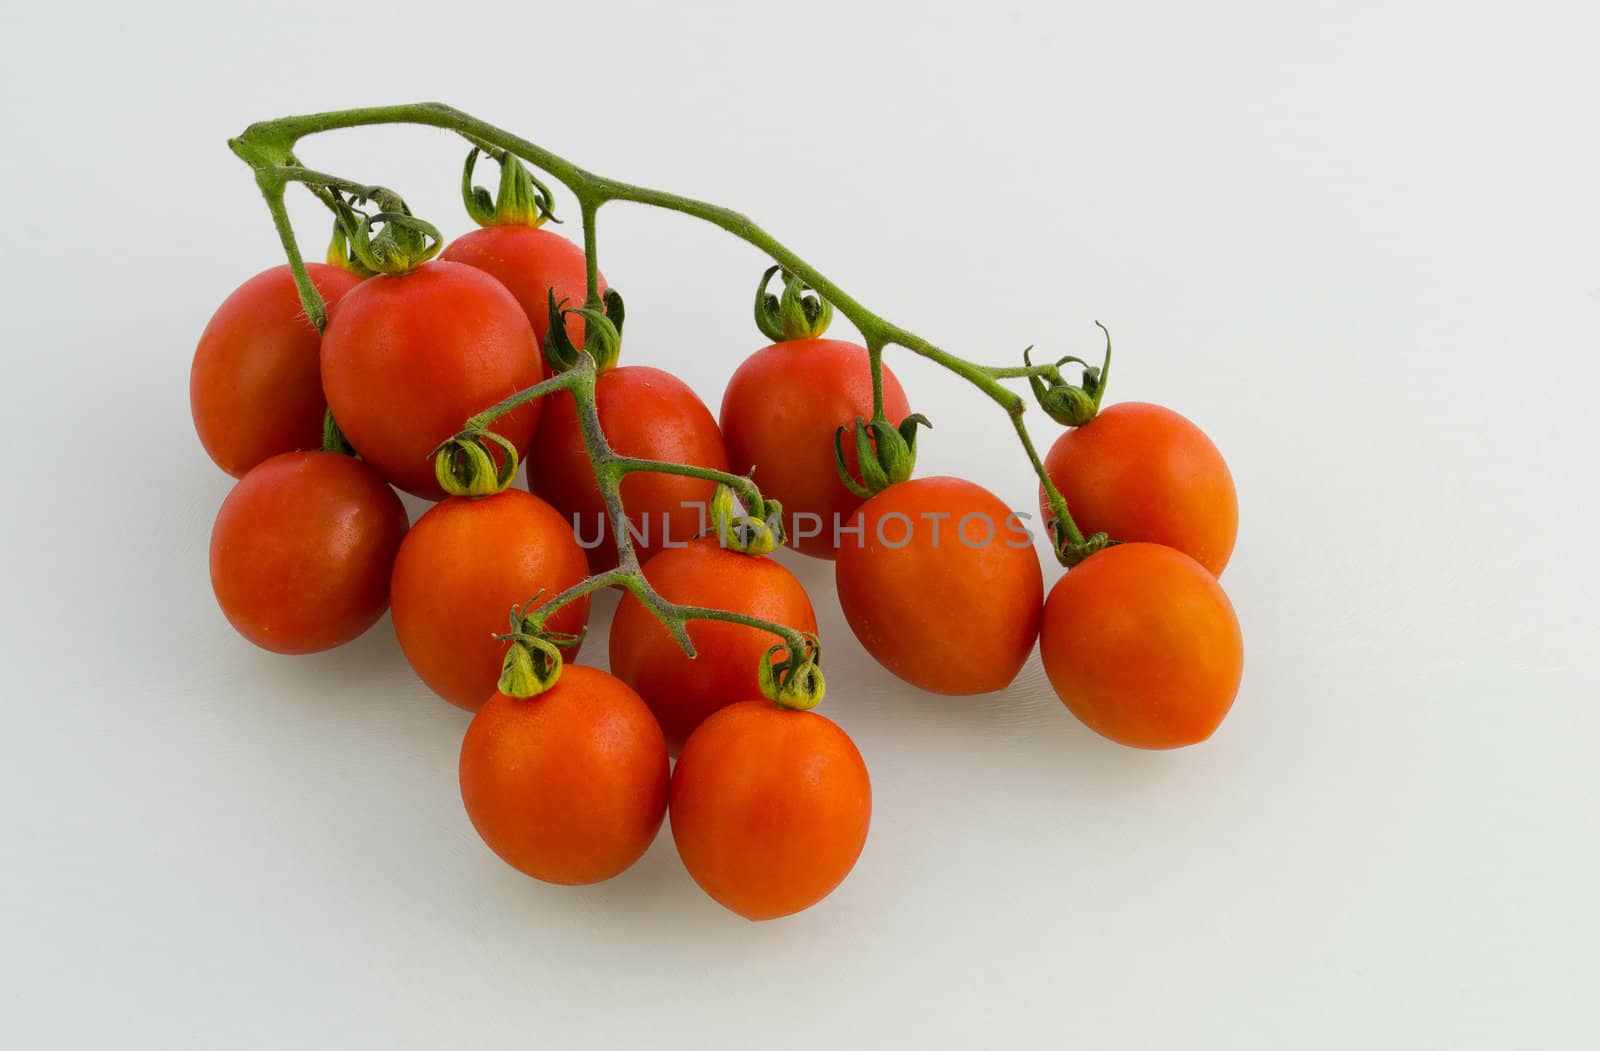 Tomatoes on the vine by Jez22